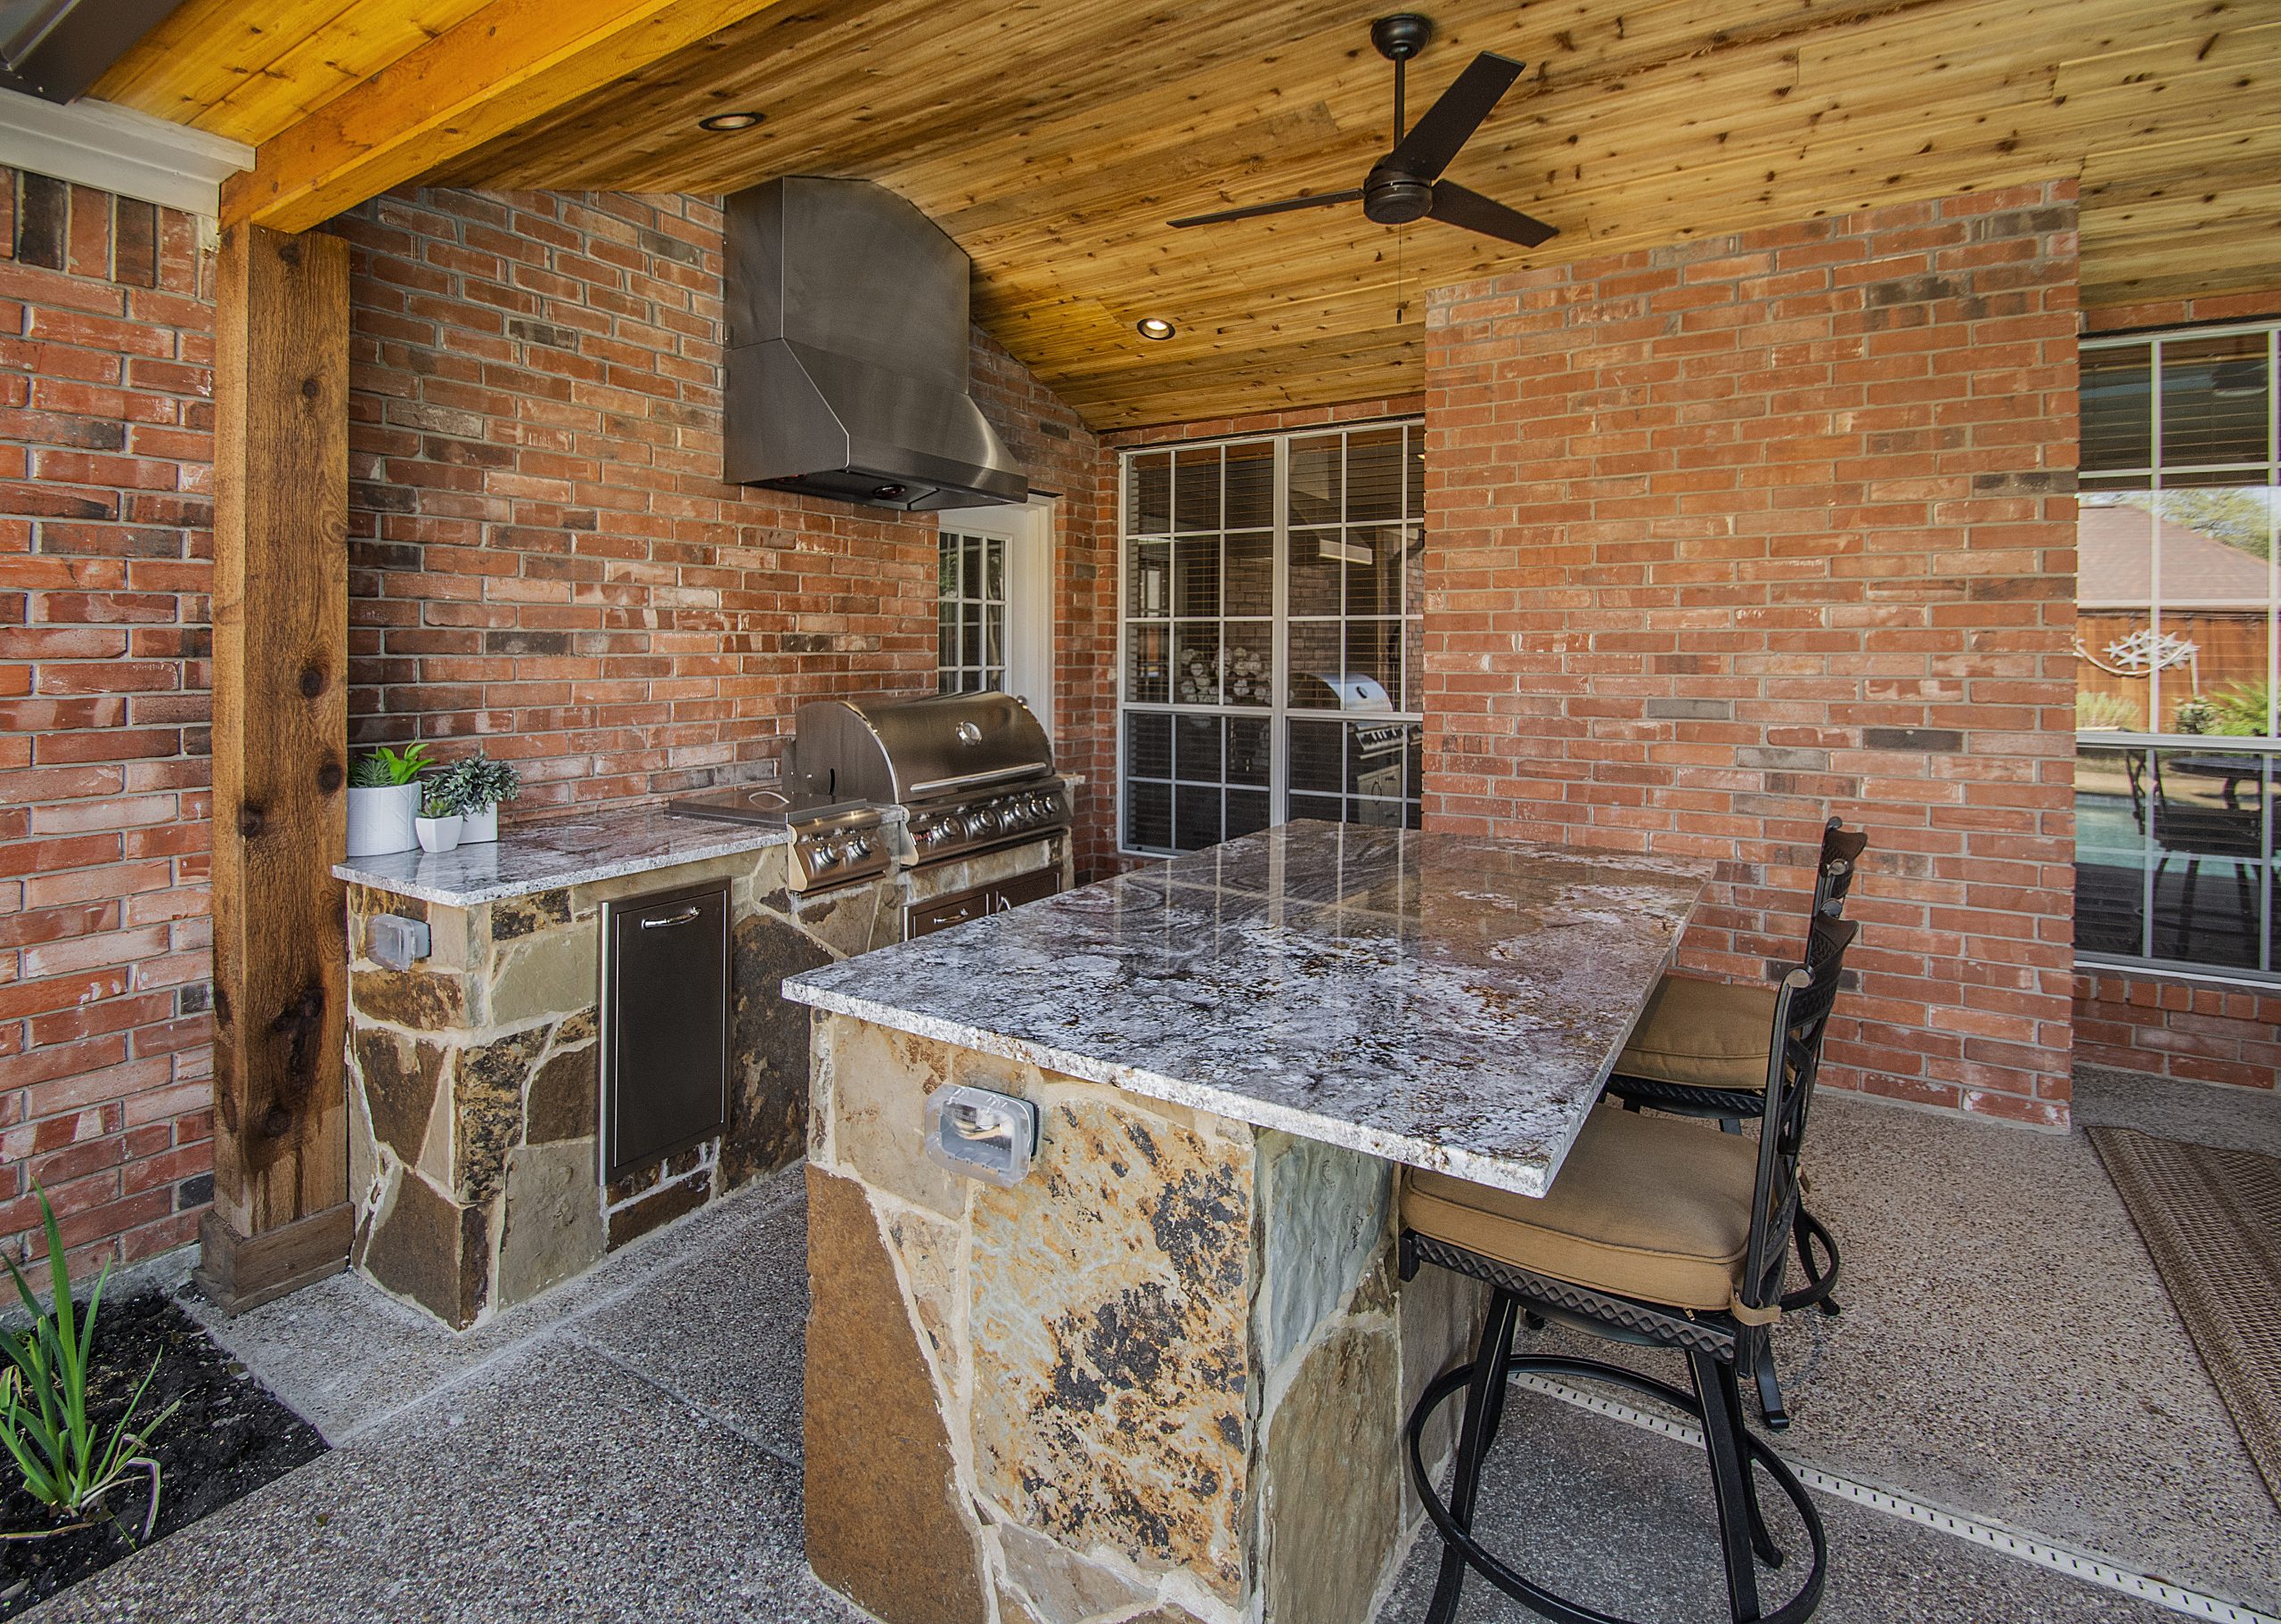 5 Things to Consider When Adding an Outdoor Kitchen to Your Home